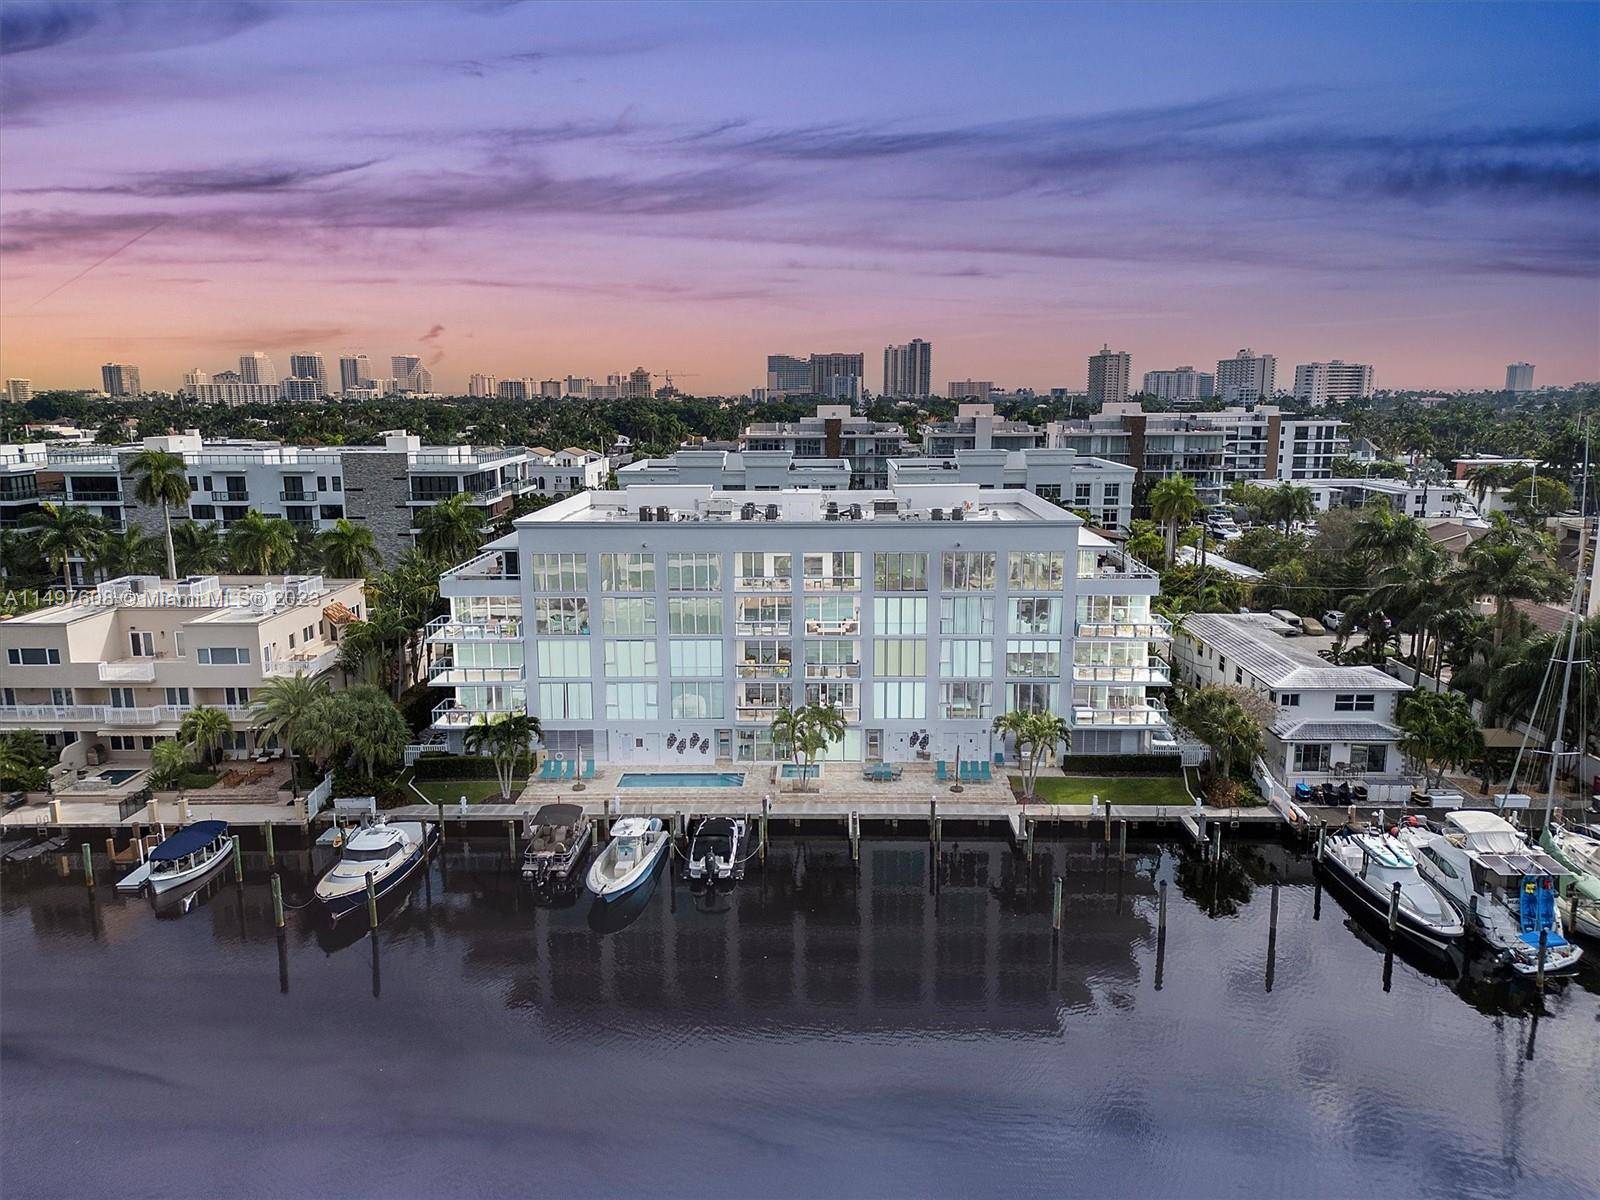 An EXTREMELY RARE opportunity awaits you in the heart of stunning Las Olas, Ft.